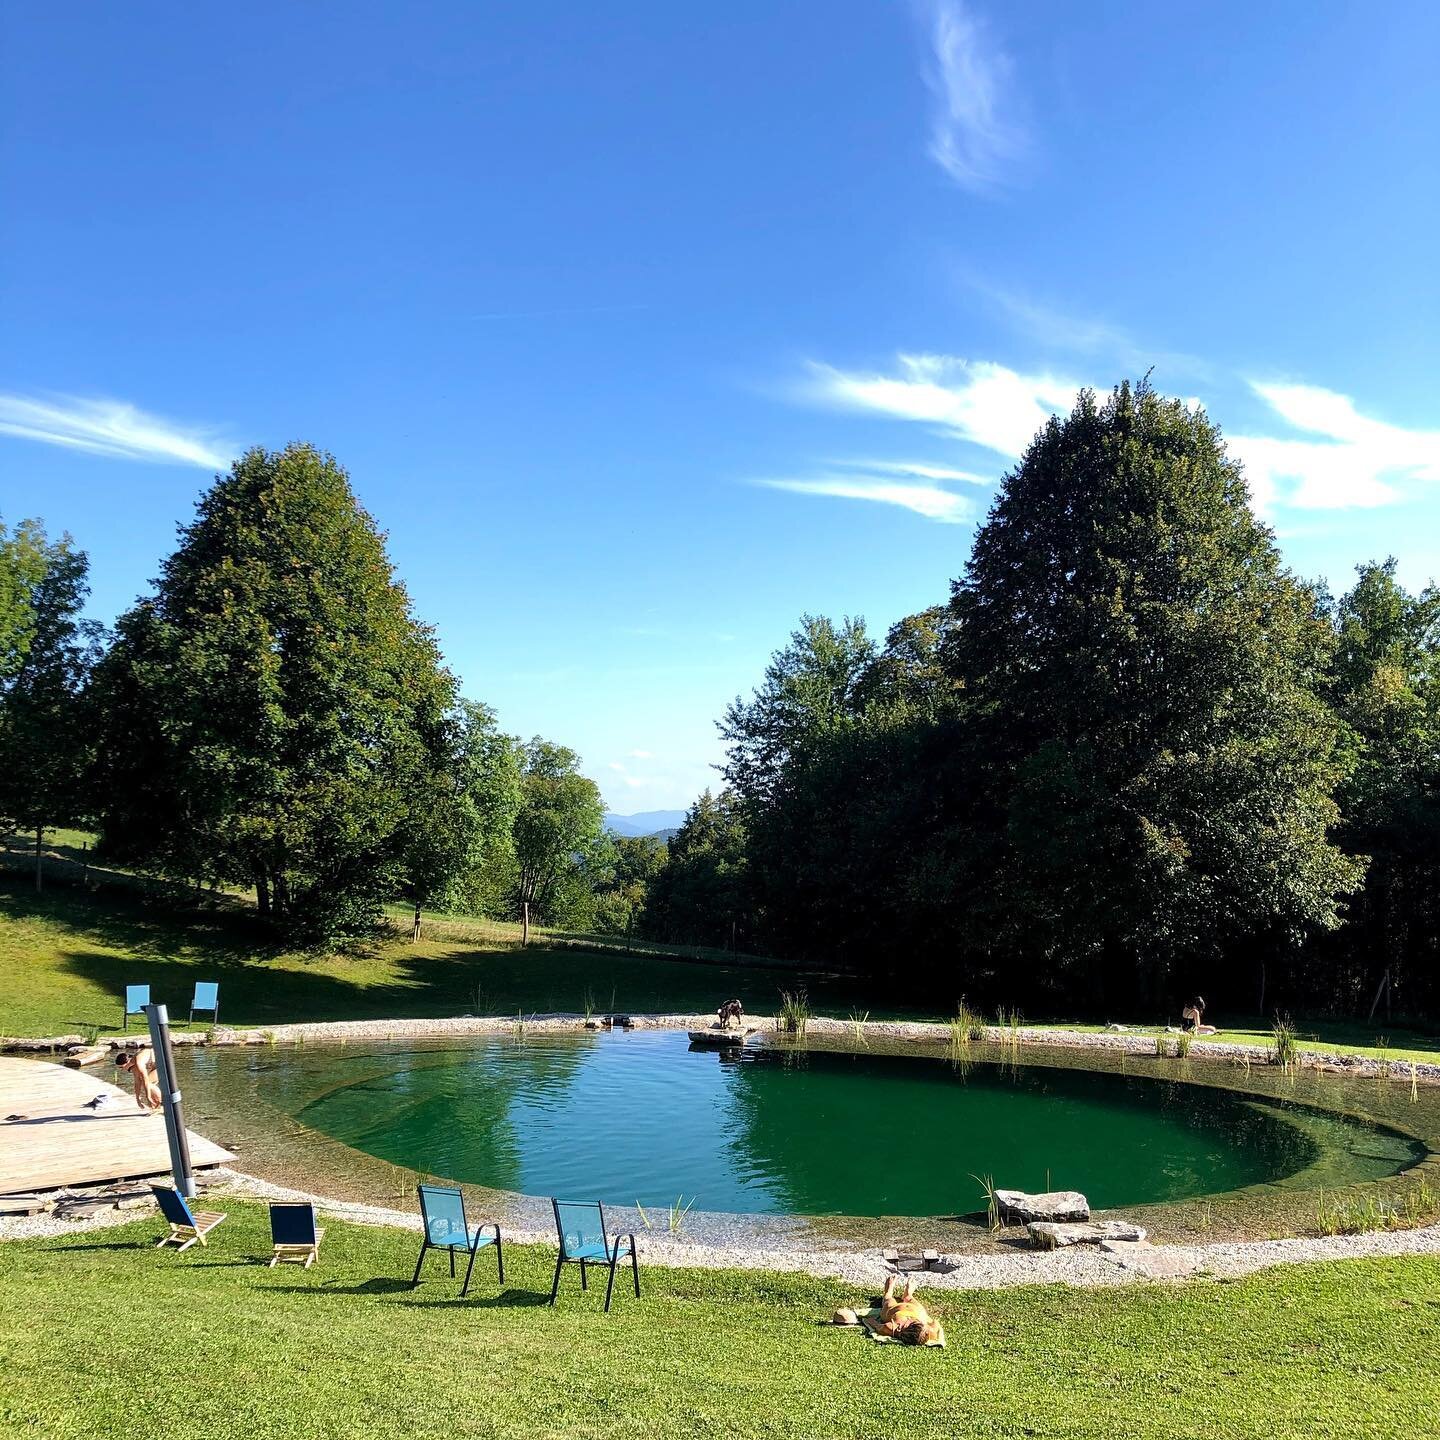 Good news! ✨All the signs are positive for our retreat in beautiful Slovenia⁣ ☀️🌺🌿
⁣
✅ Germany is on Slovenia's green list ⁣
✅ &amp; vice versa⁣
✅ Also orange / red list countries can enter with a test / EU vaccination passport⁣
✅ Plus, a friendly 